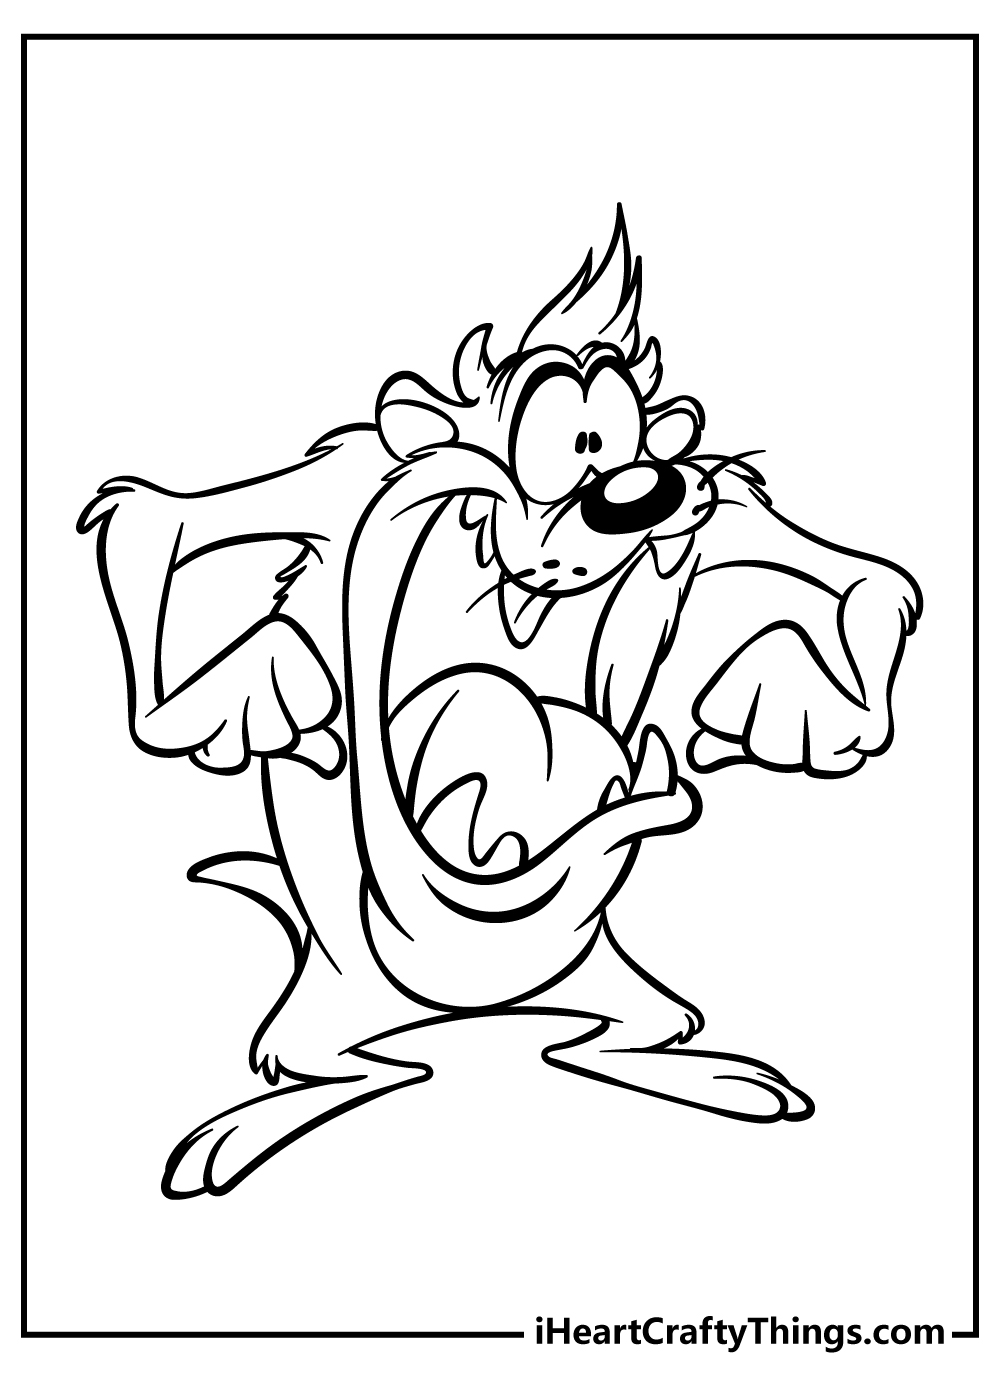 Looney Tunes Coloring Pages for kids free download